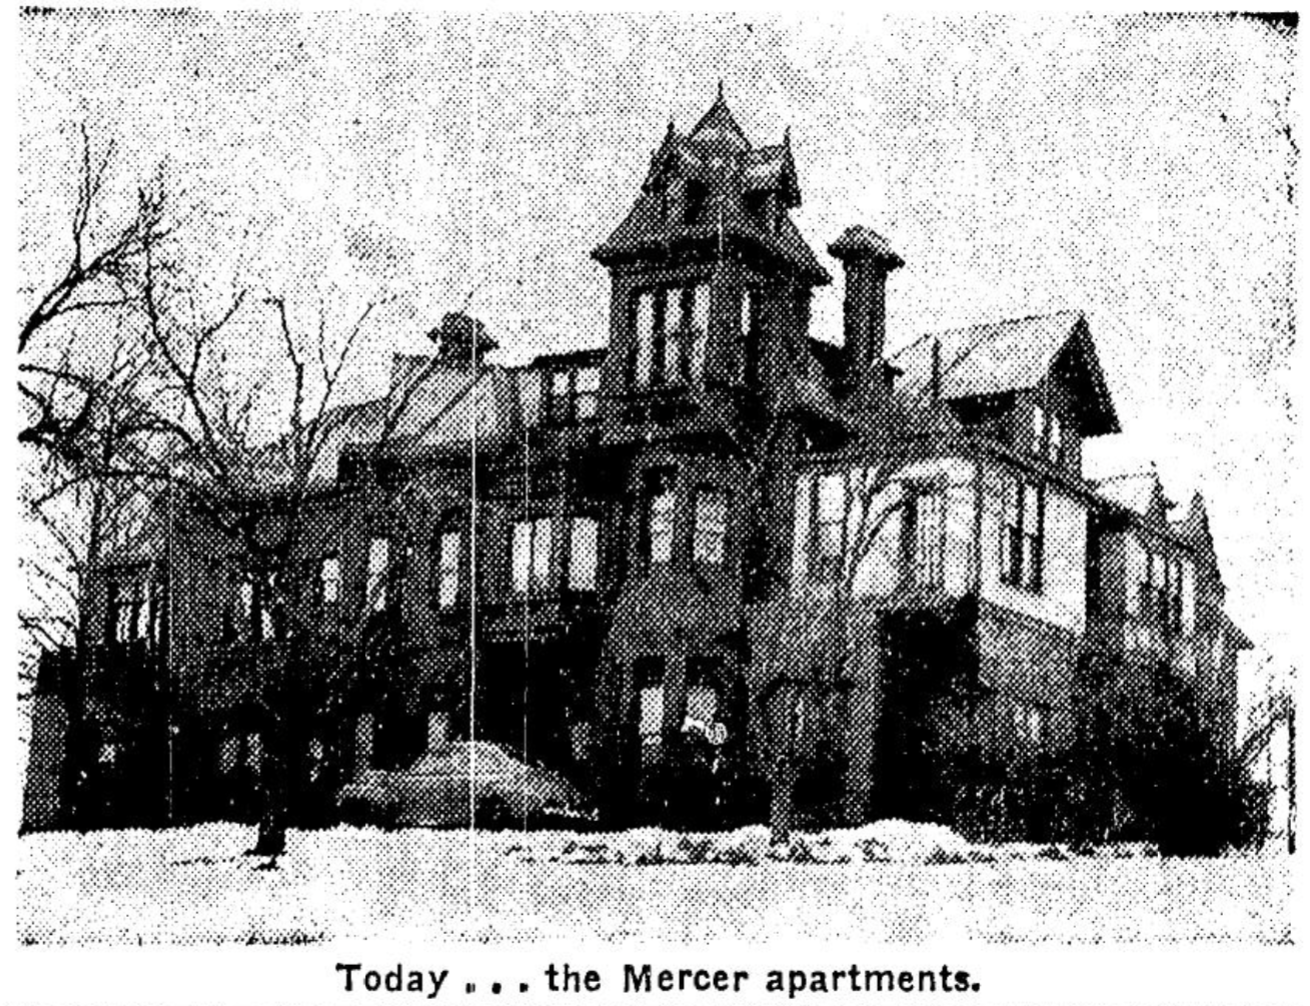 This is from a February 15, 1942 Omaha World-Herald story about the Mercer Mansion.